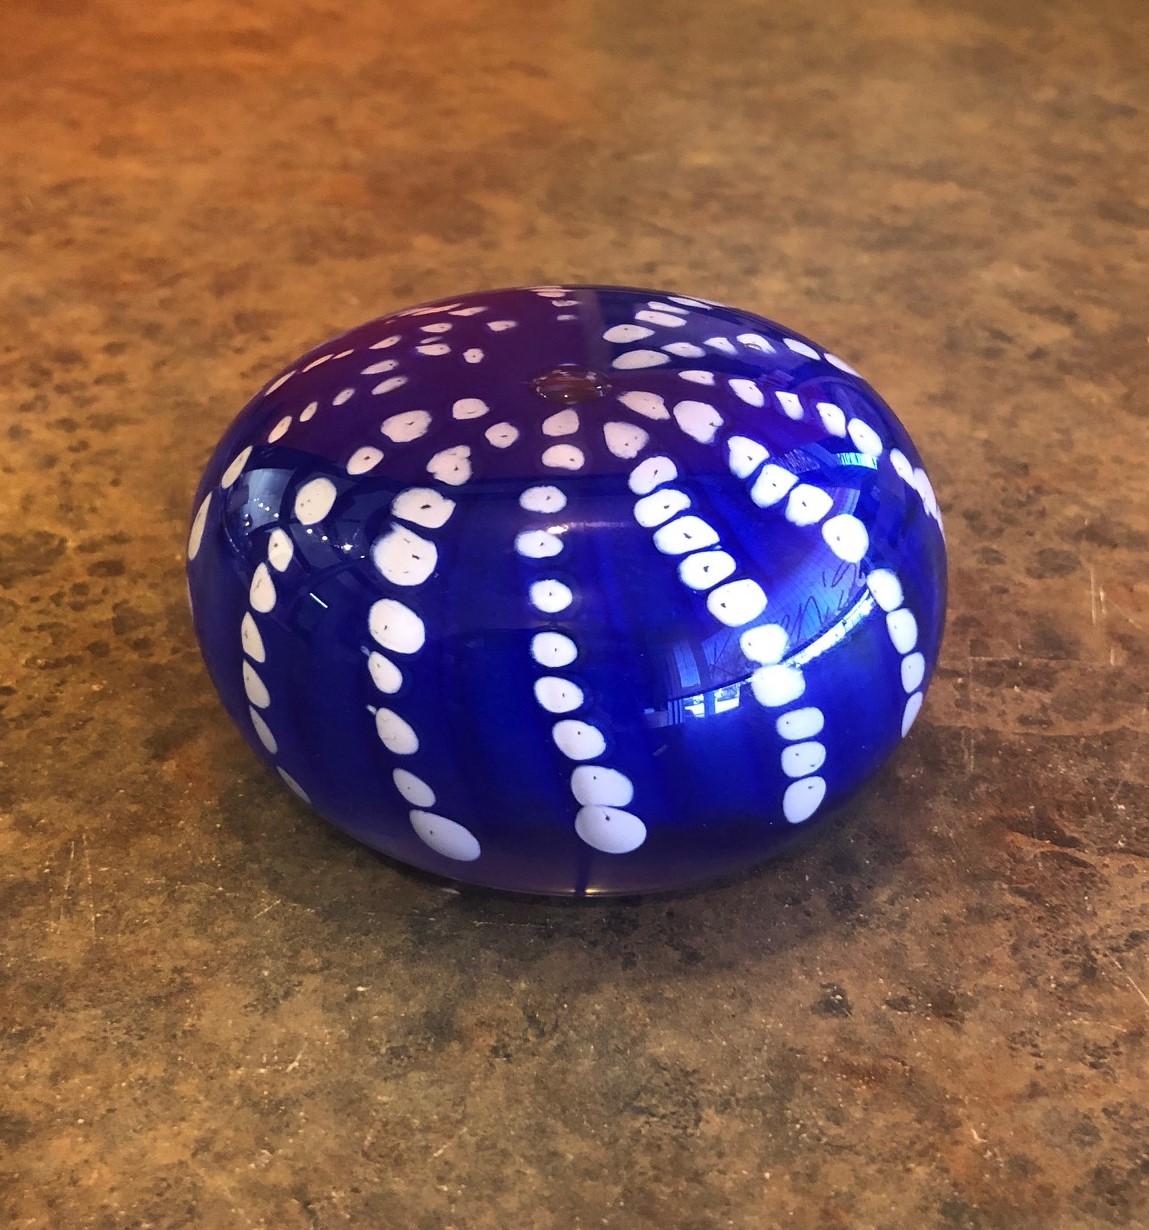 A wonderful art glass orb sculpture or paperweight by Brian Higer of American Studio, circa 1988. The orb is internally layered with white dots on a bright blue background. The piece is signed and dated by the artist on the underside.